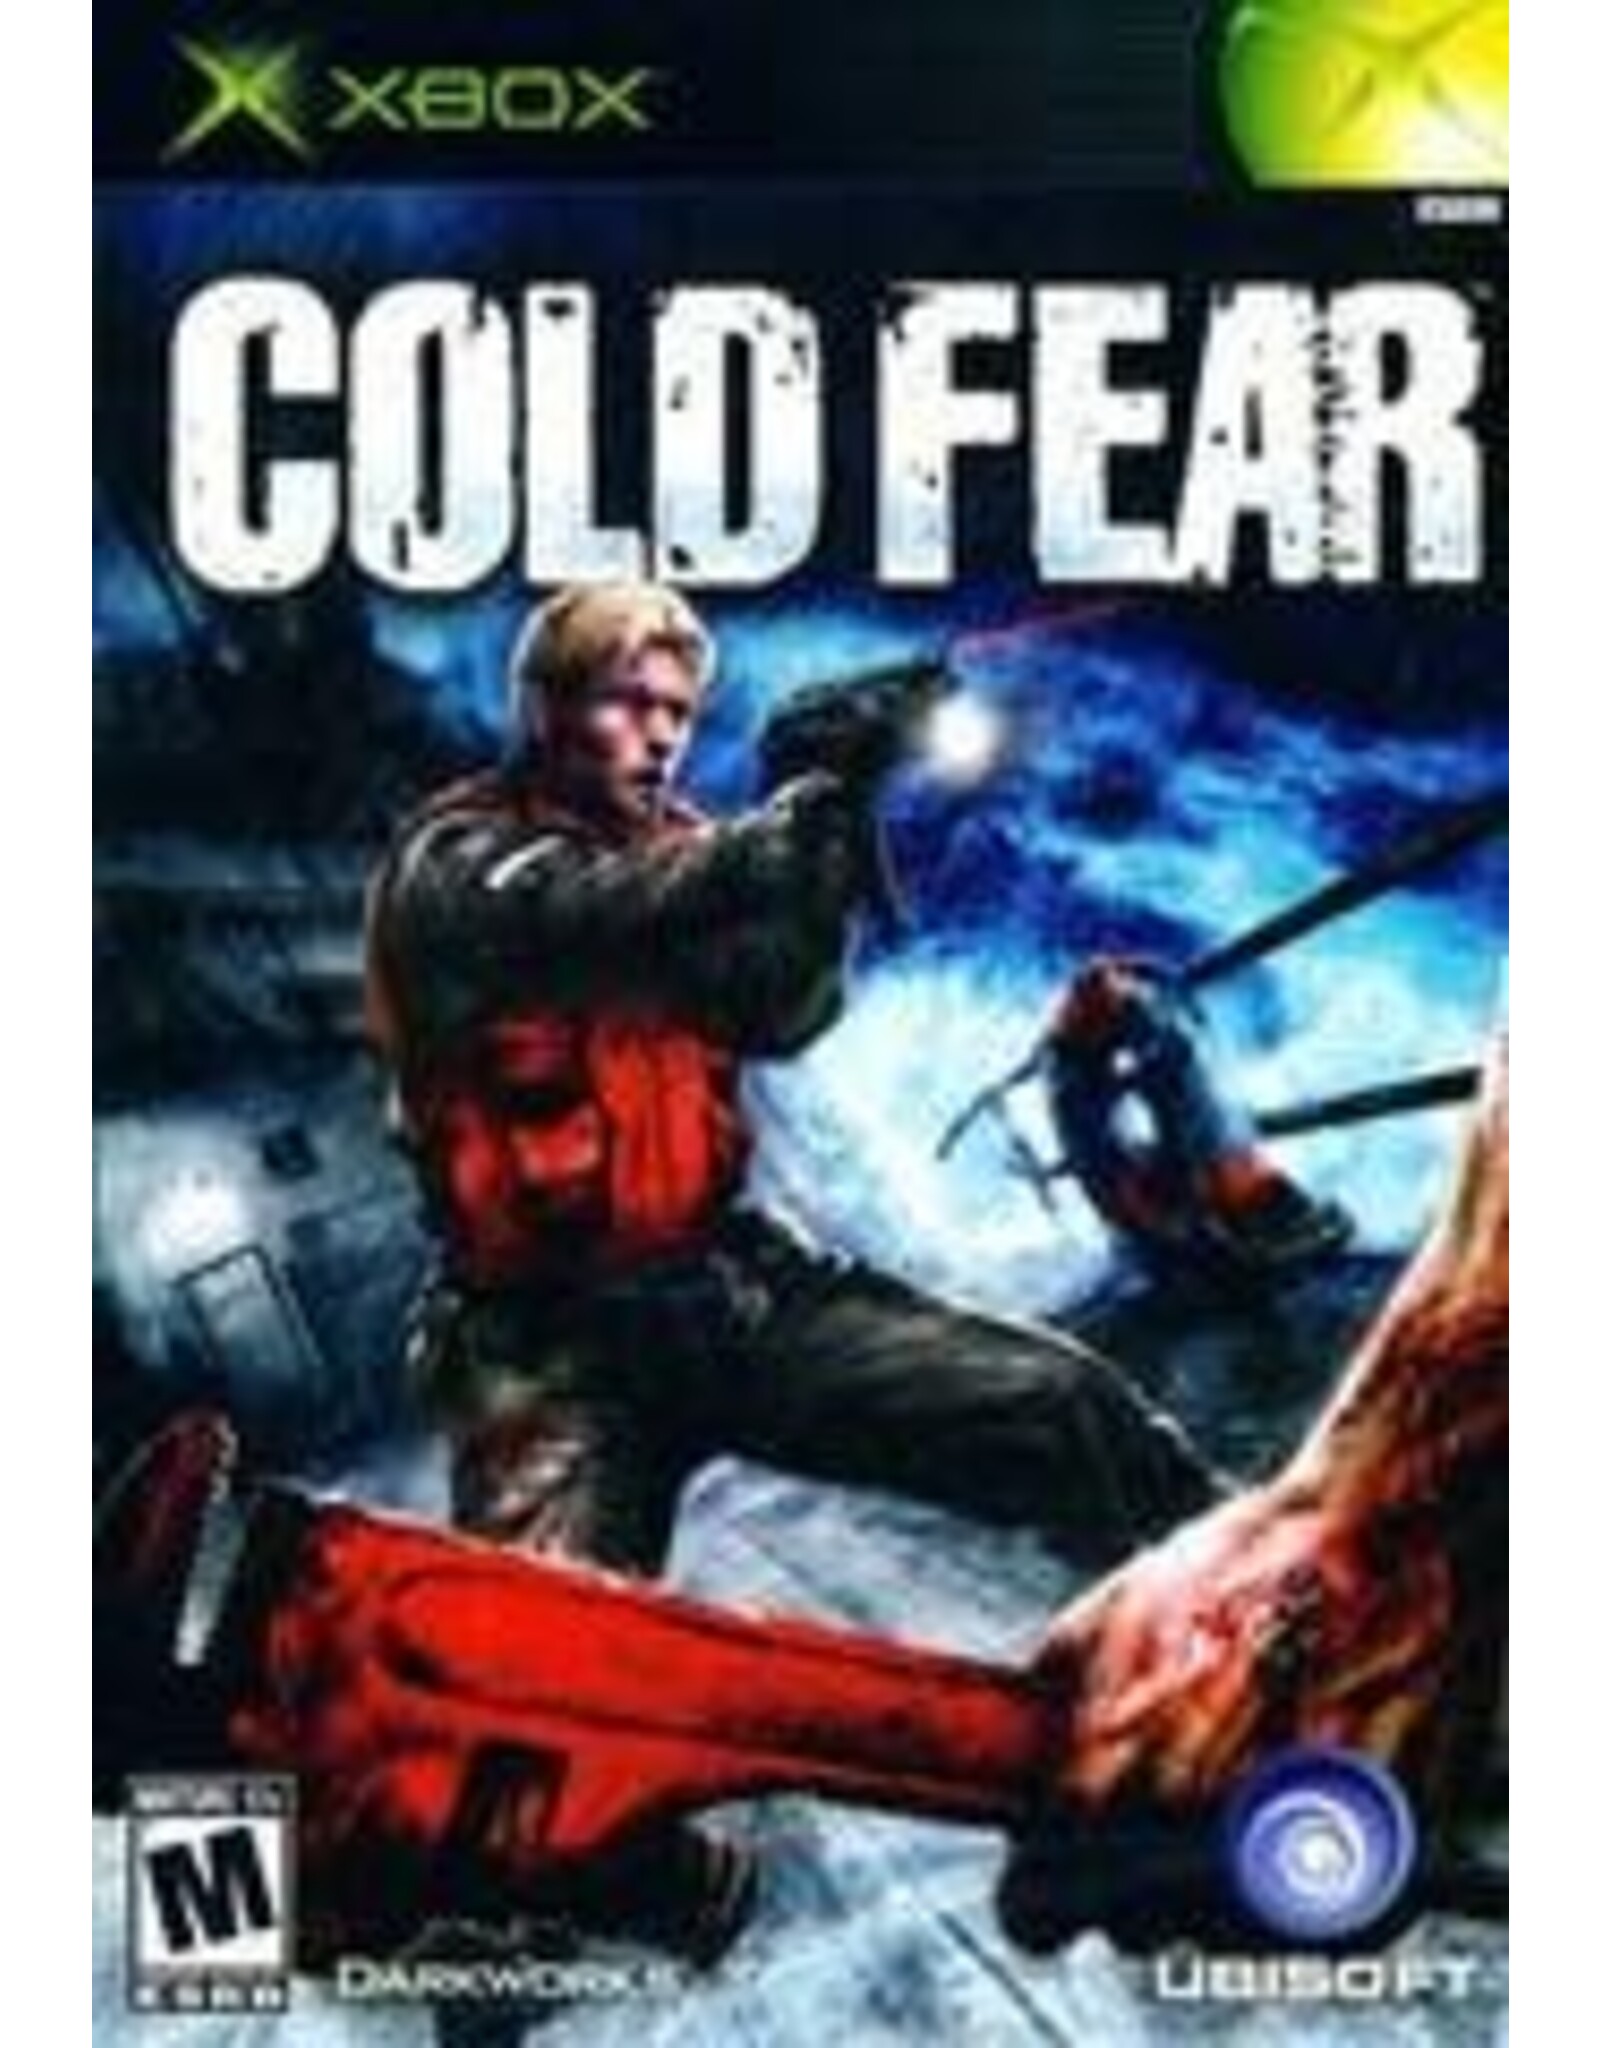 Xbox Cold Fear (CiB, Sticker on Manual and Disc)